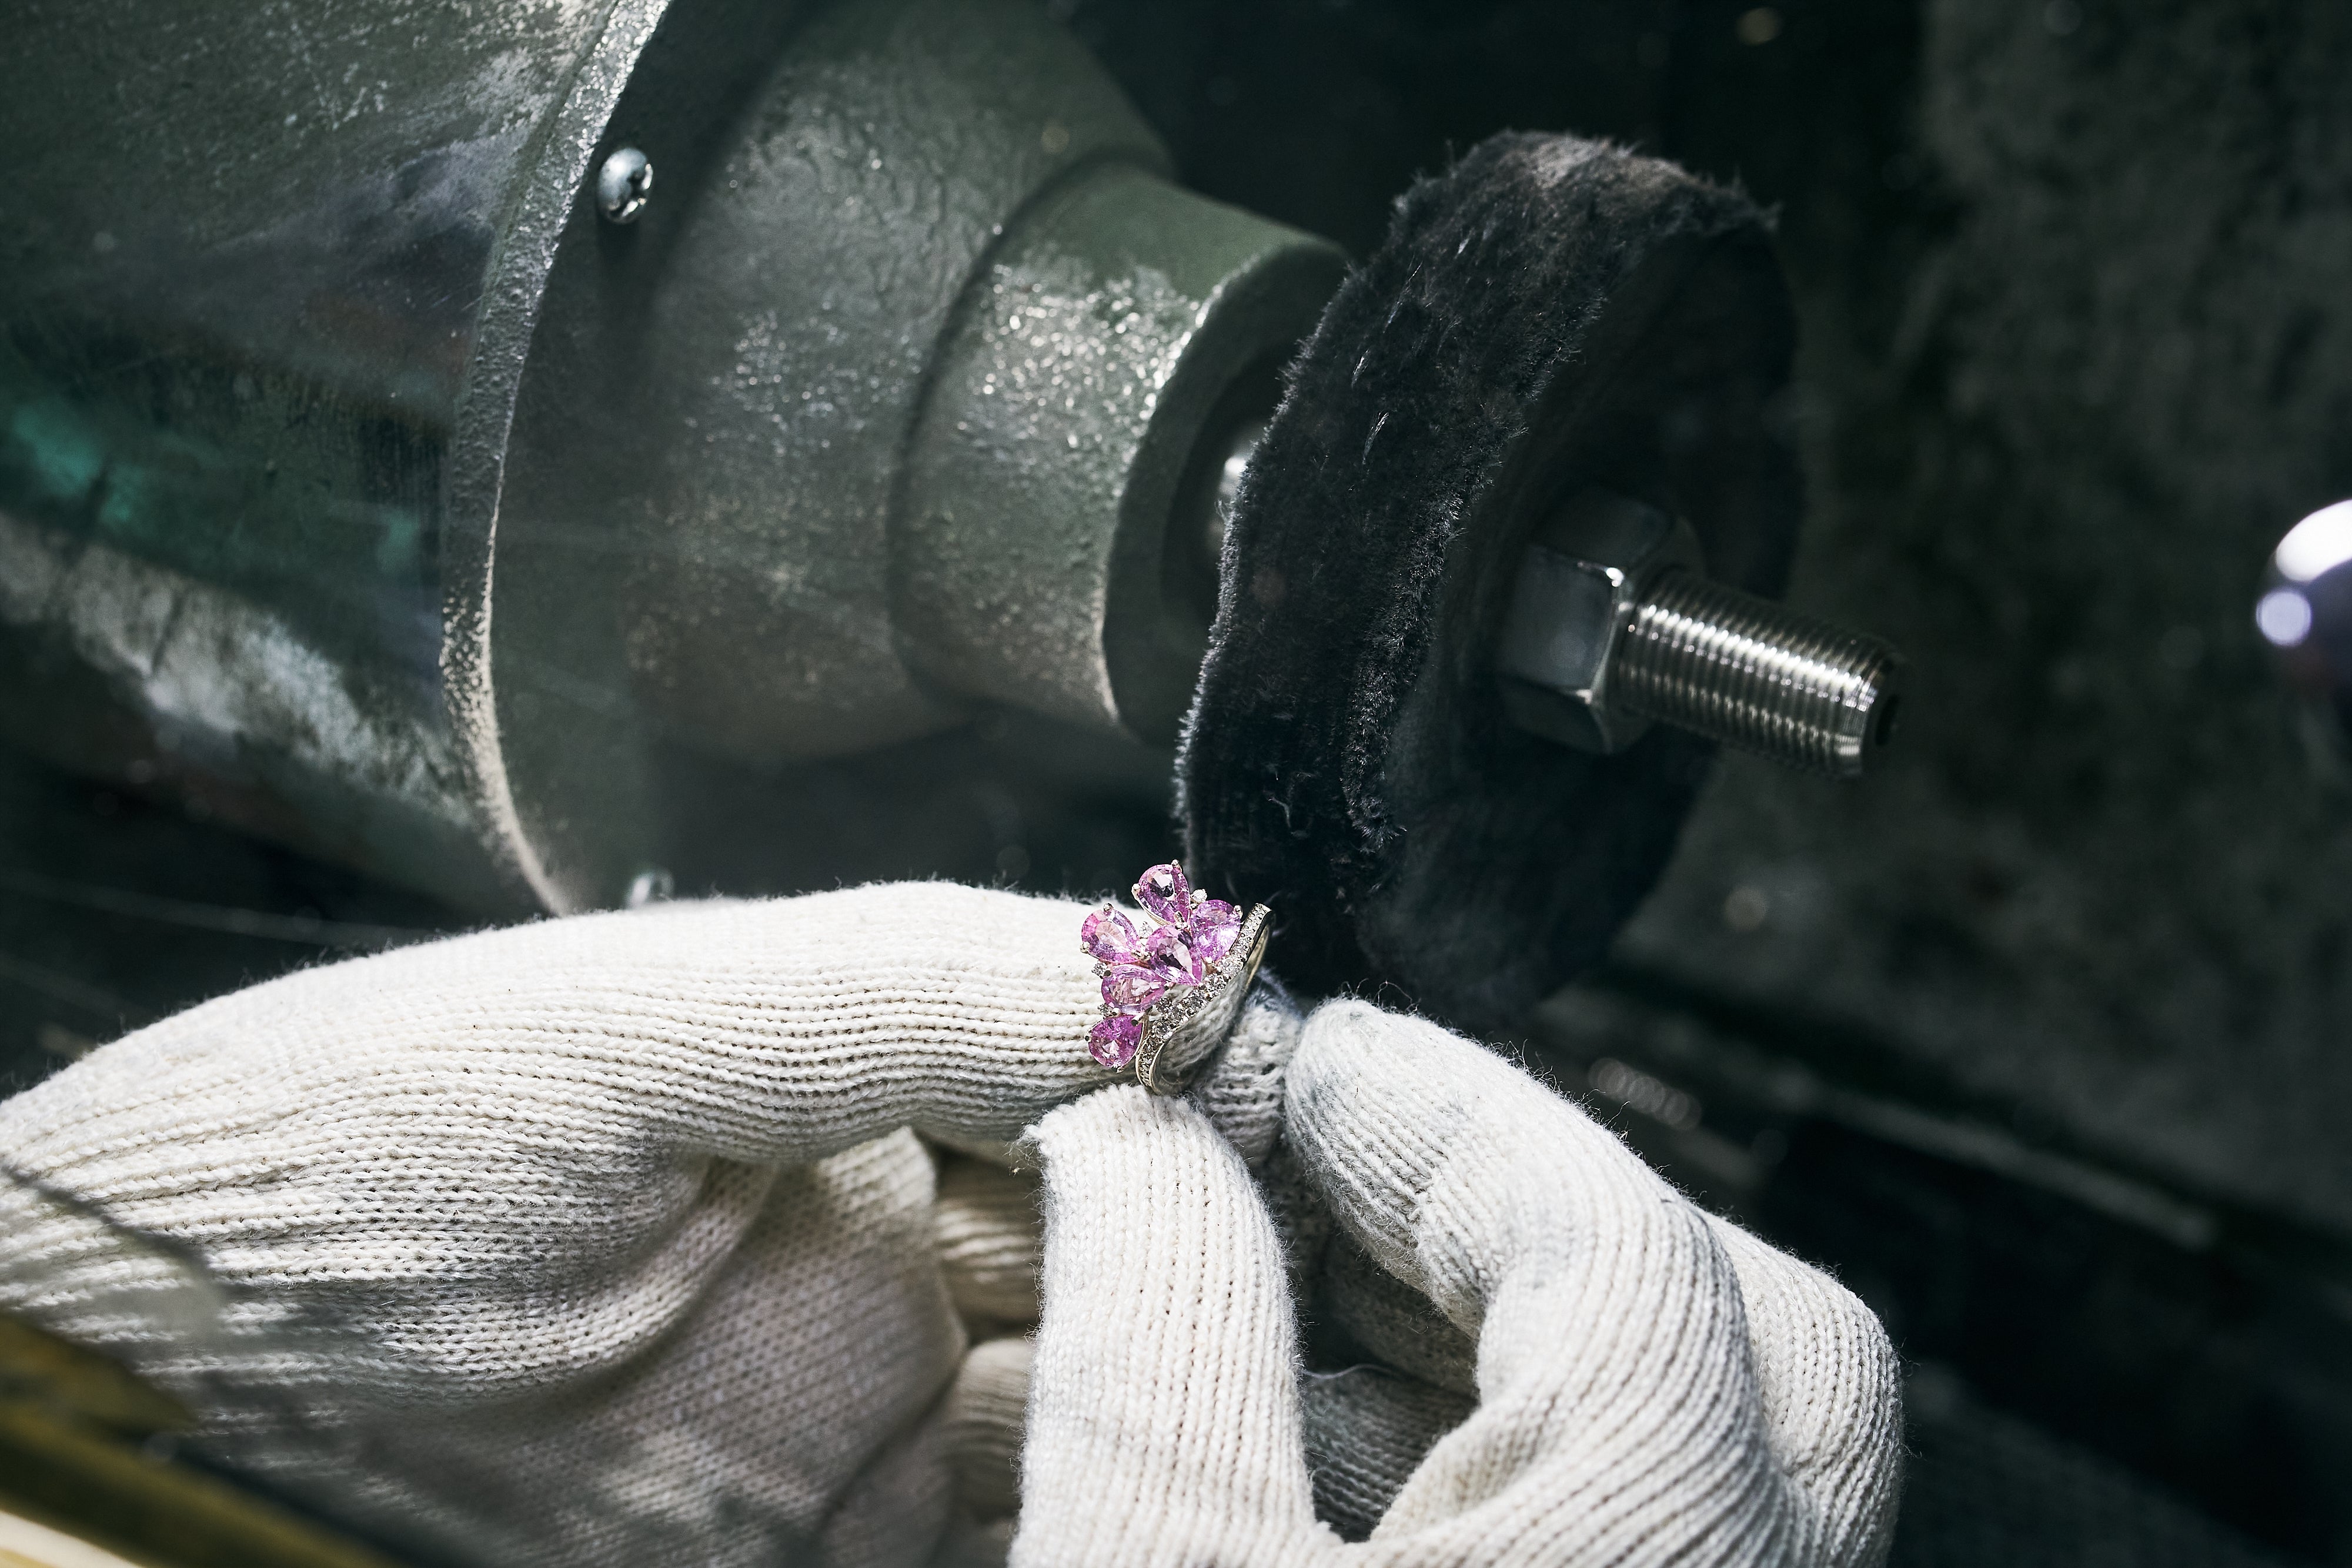 White gold ring with pink gemstones is polished by a buffing wheel